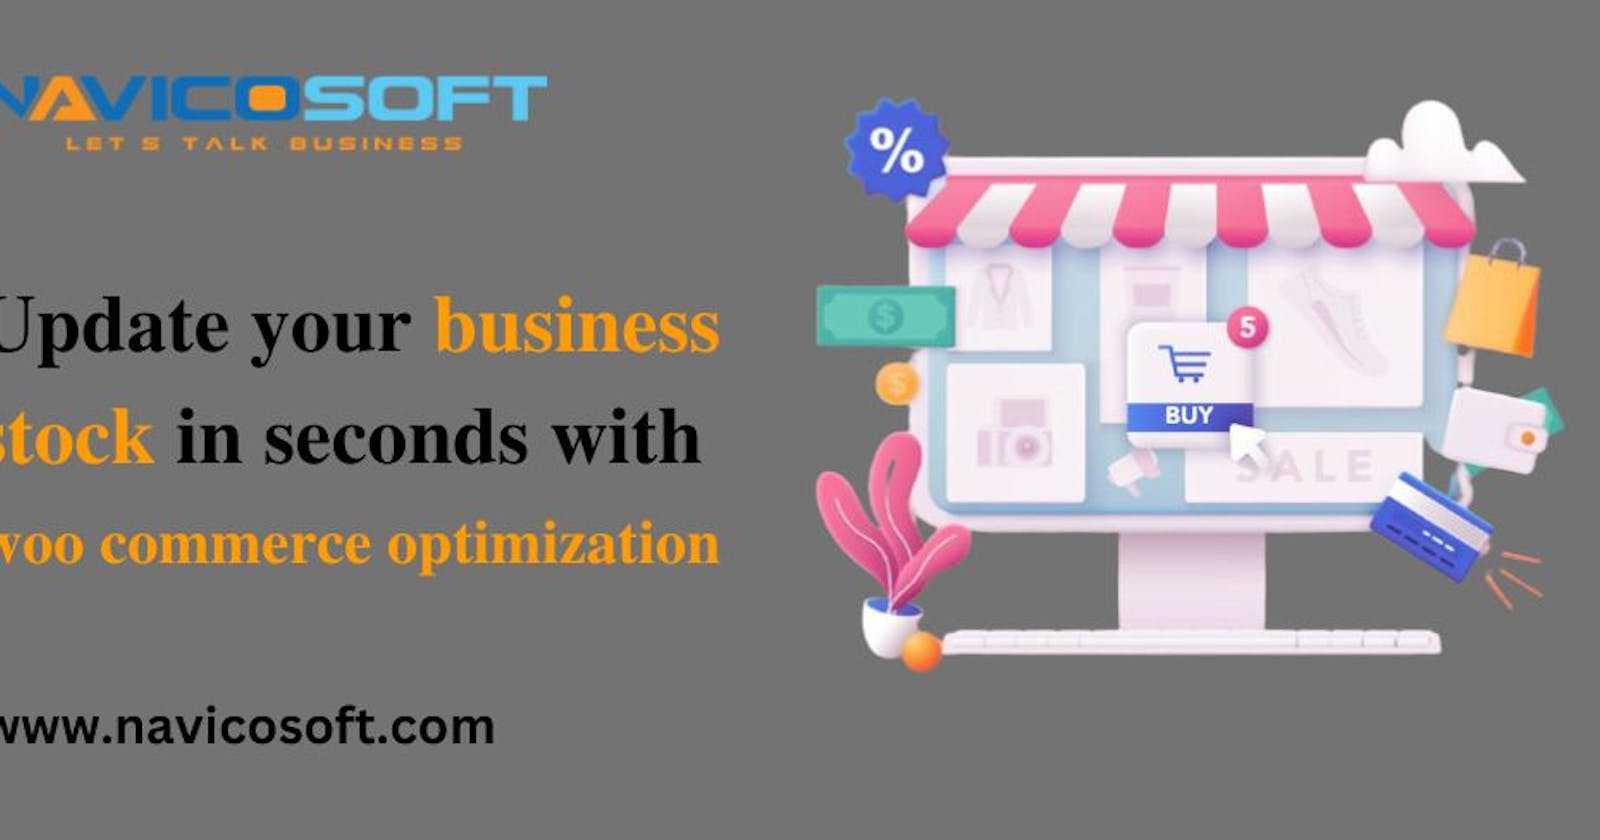 Update your business stock in seconds with woo commerce optimization